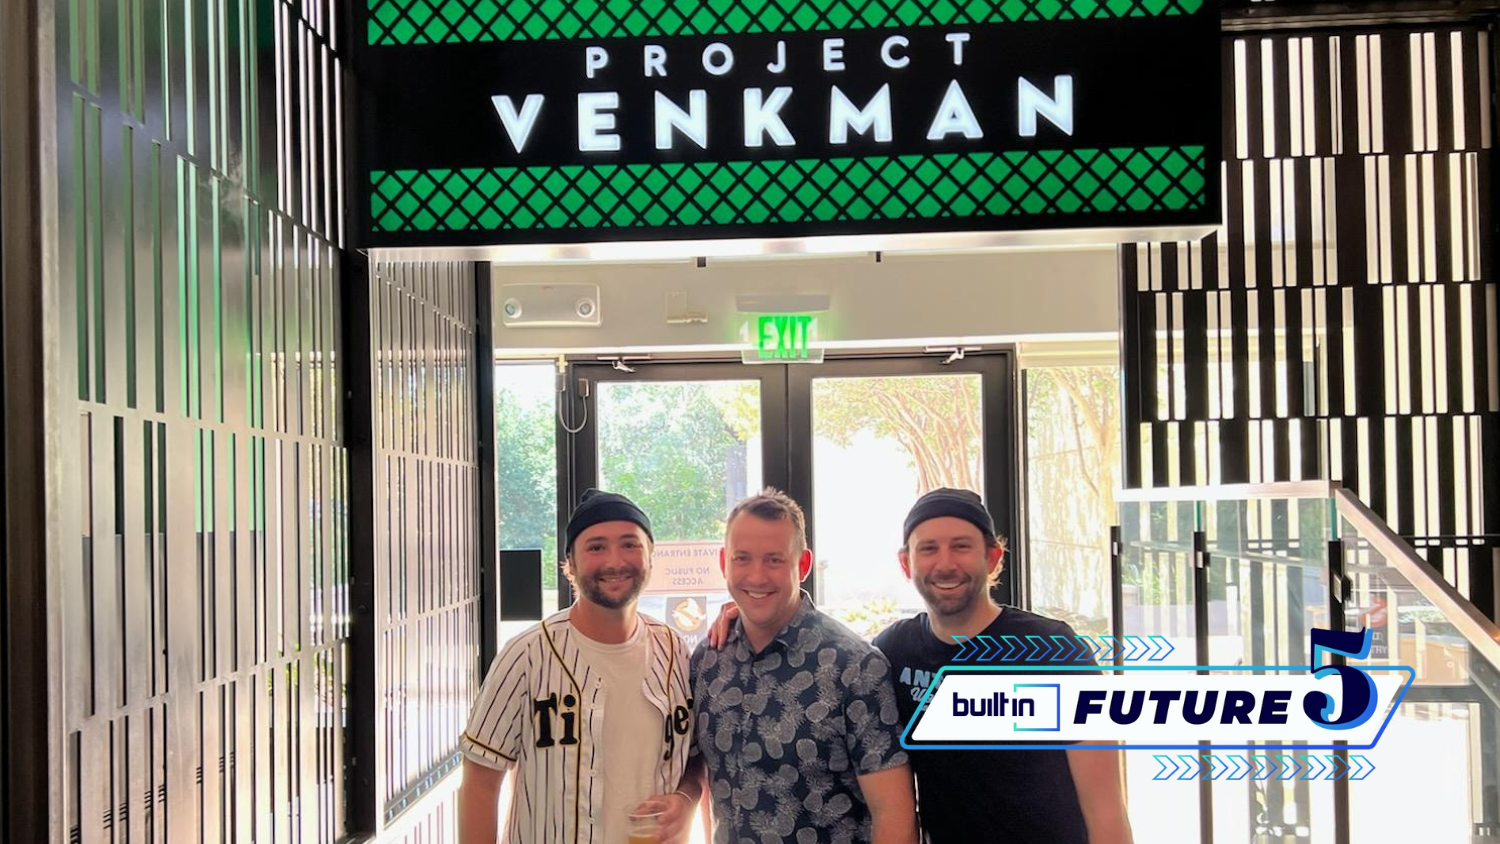 Project Venkman CEO Gavin Gillas, center, is pictured with Bill Murray's son Jackson Murray, left, and his nephew Drew Murray, right.